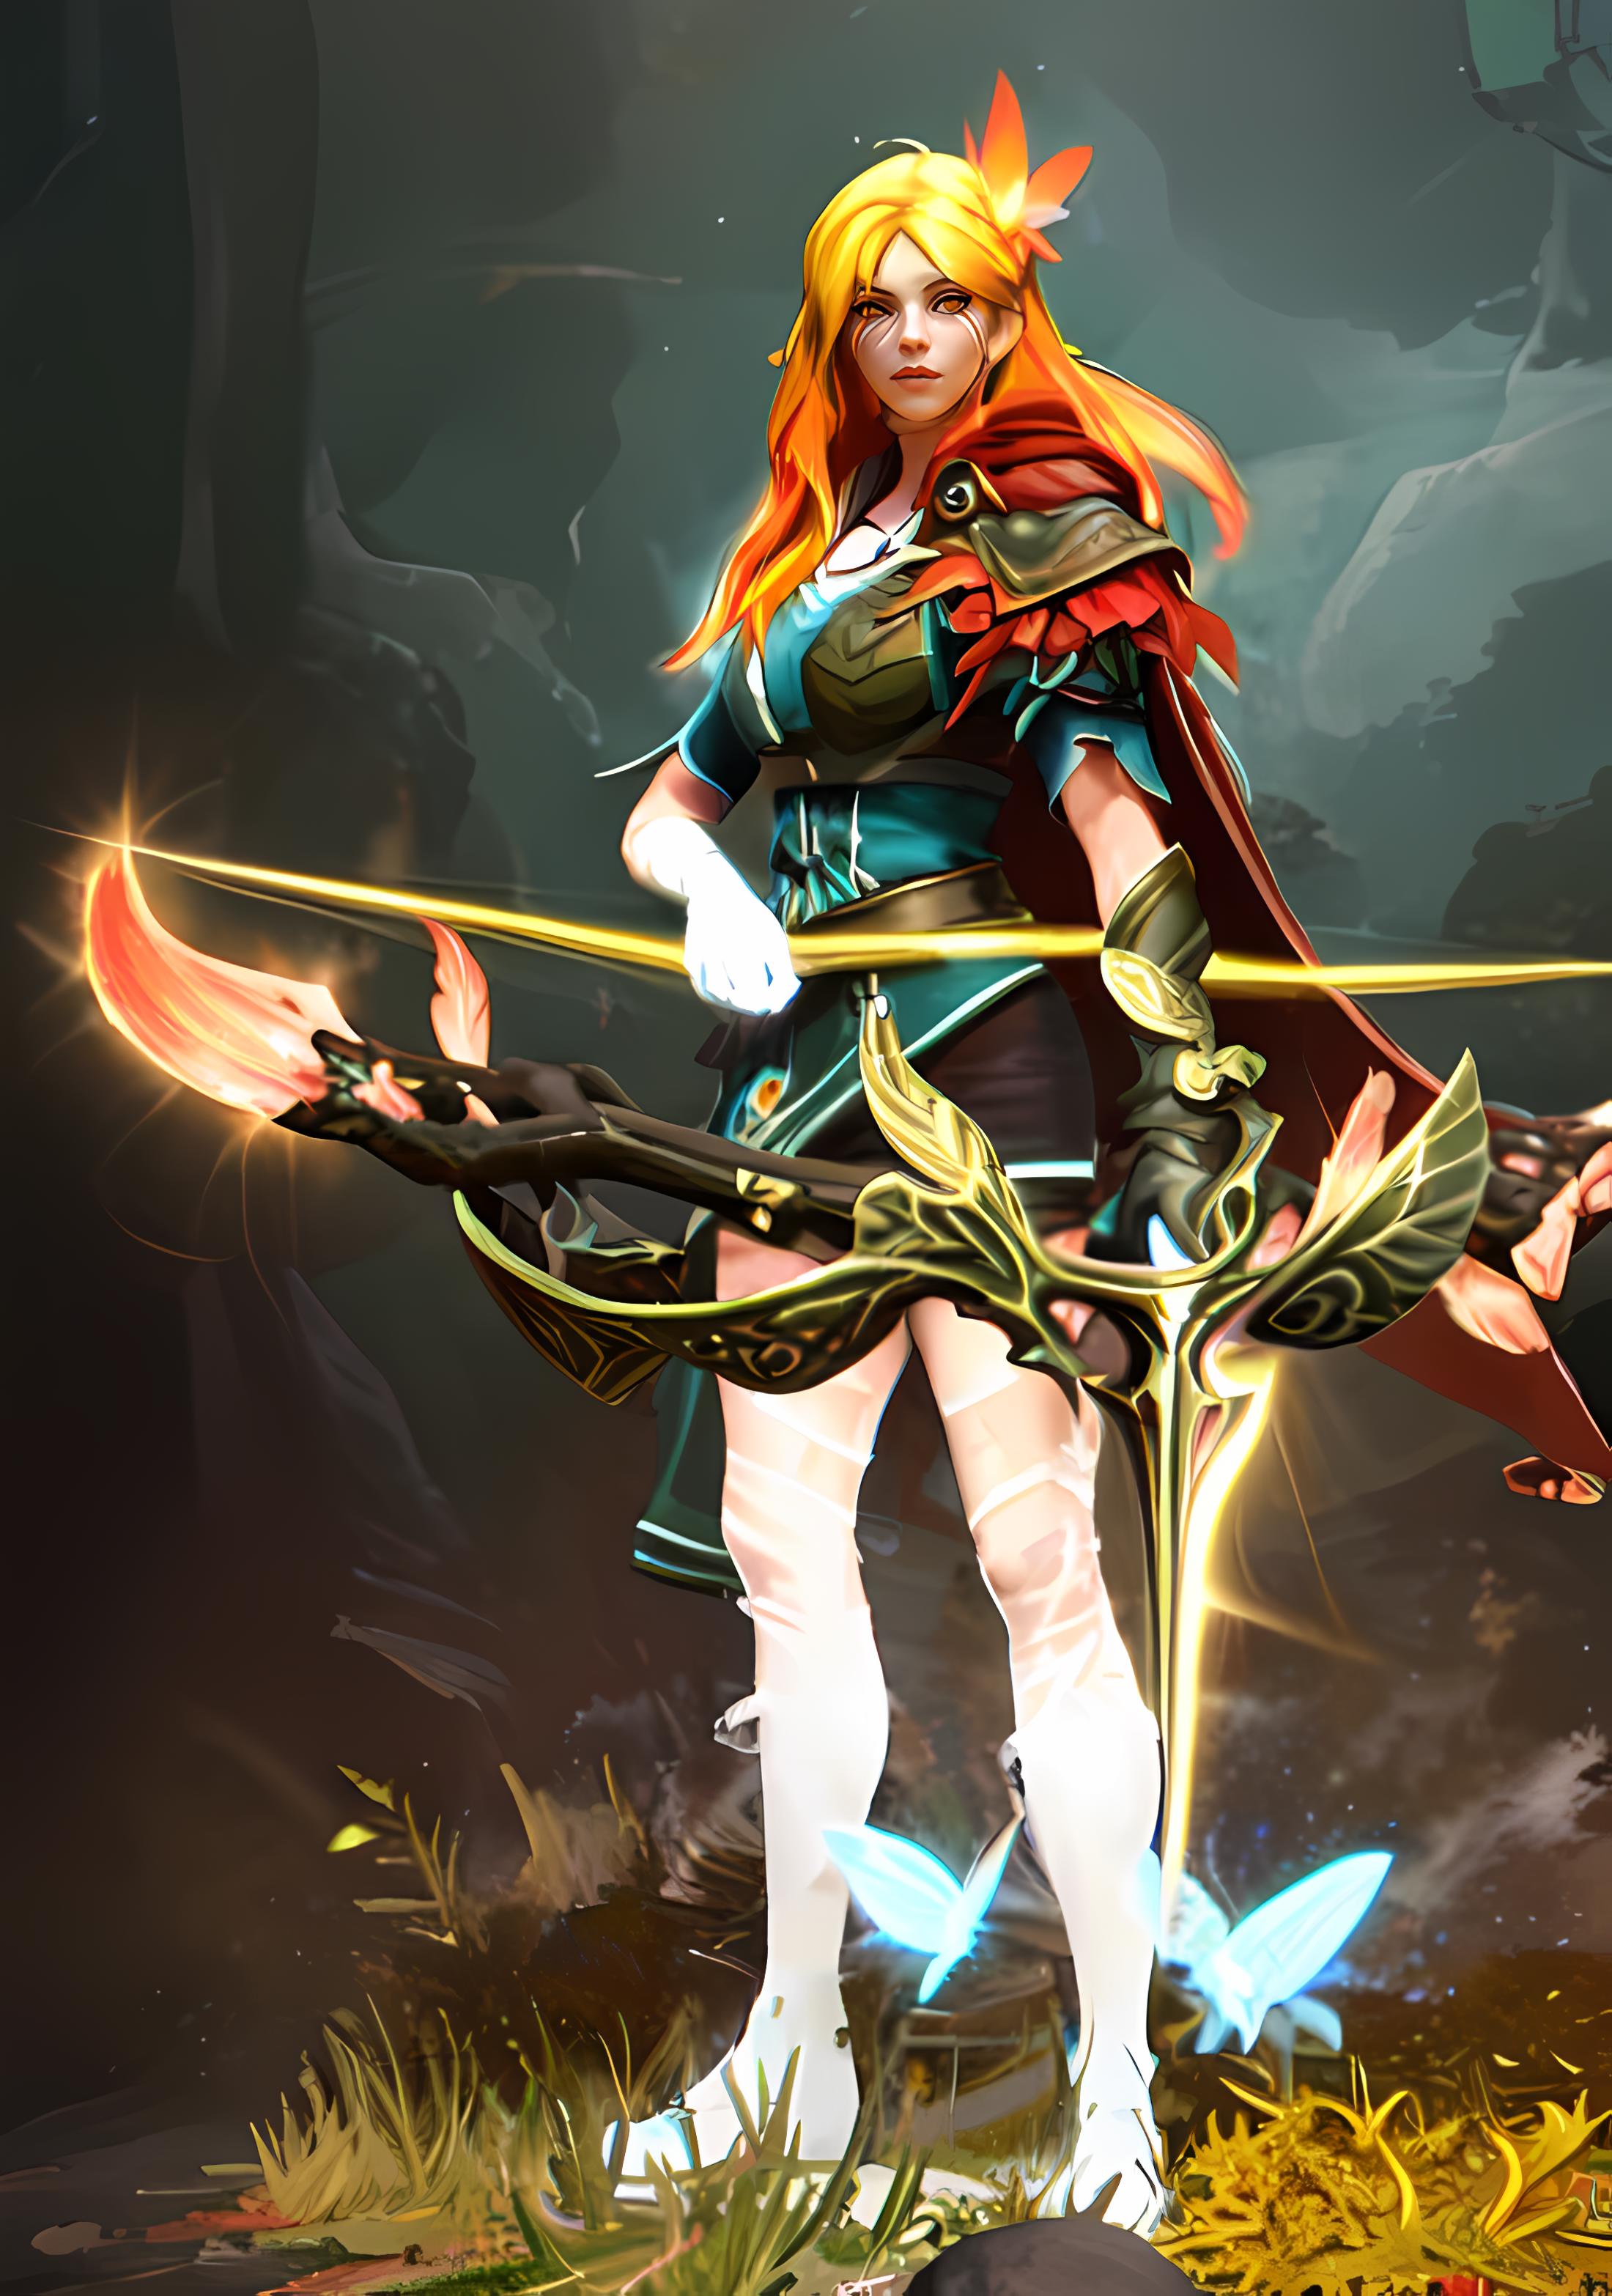 Windranger dota2 arcana styles and nsfw image by wearusquid